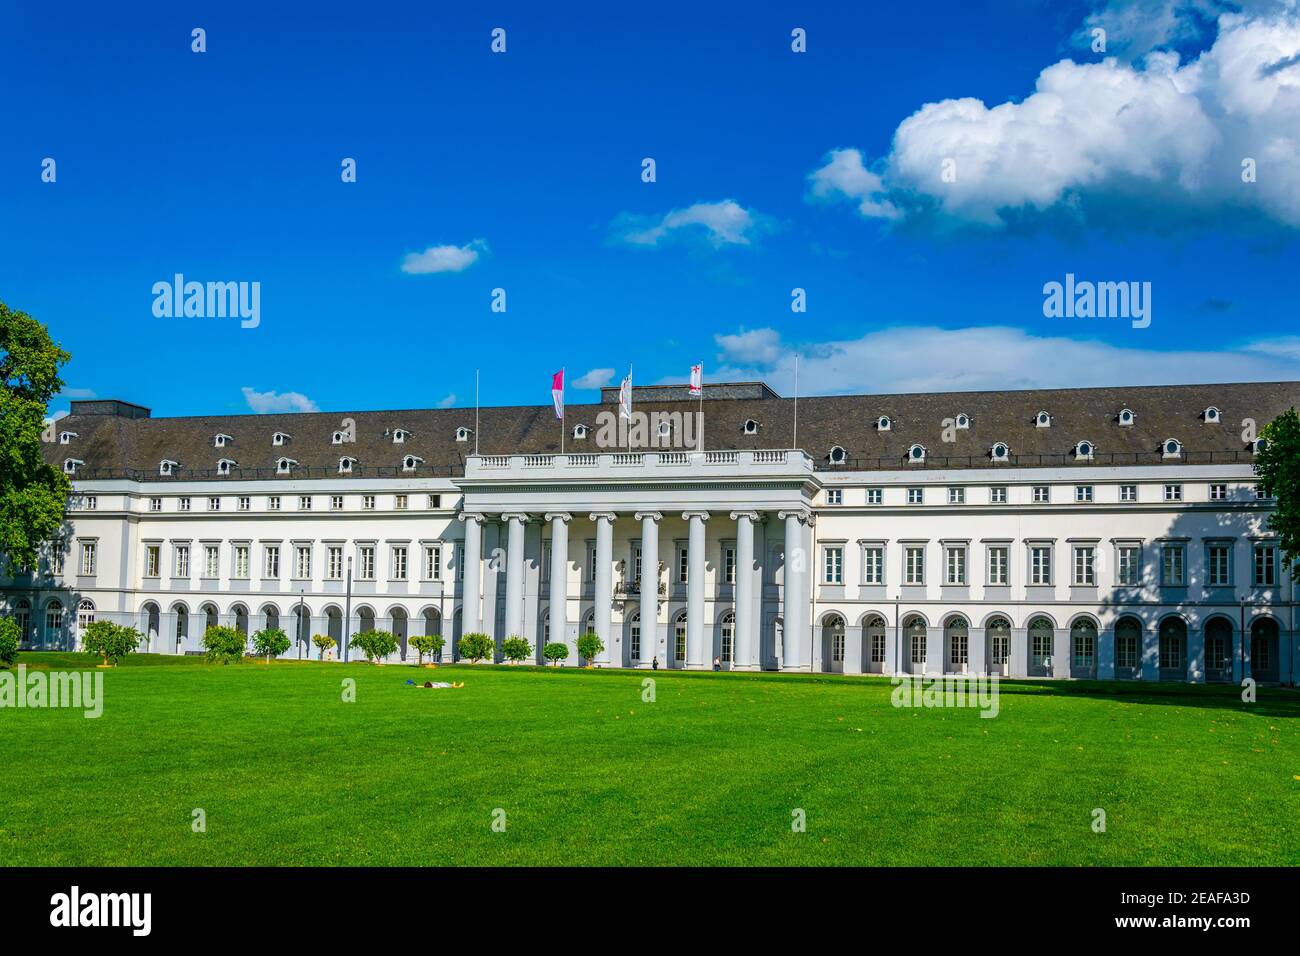 View of the Koblenz palace in Germany Stock Photo